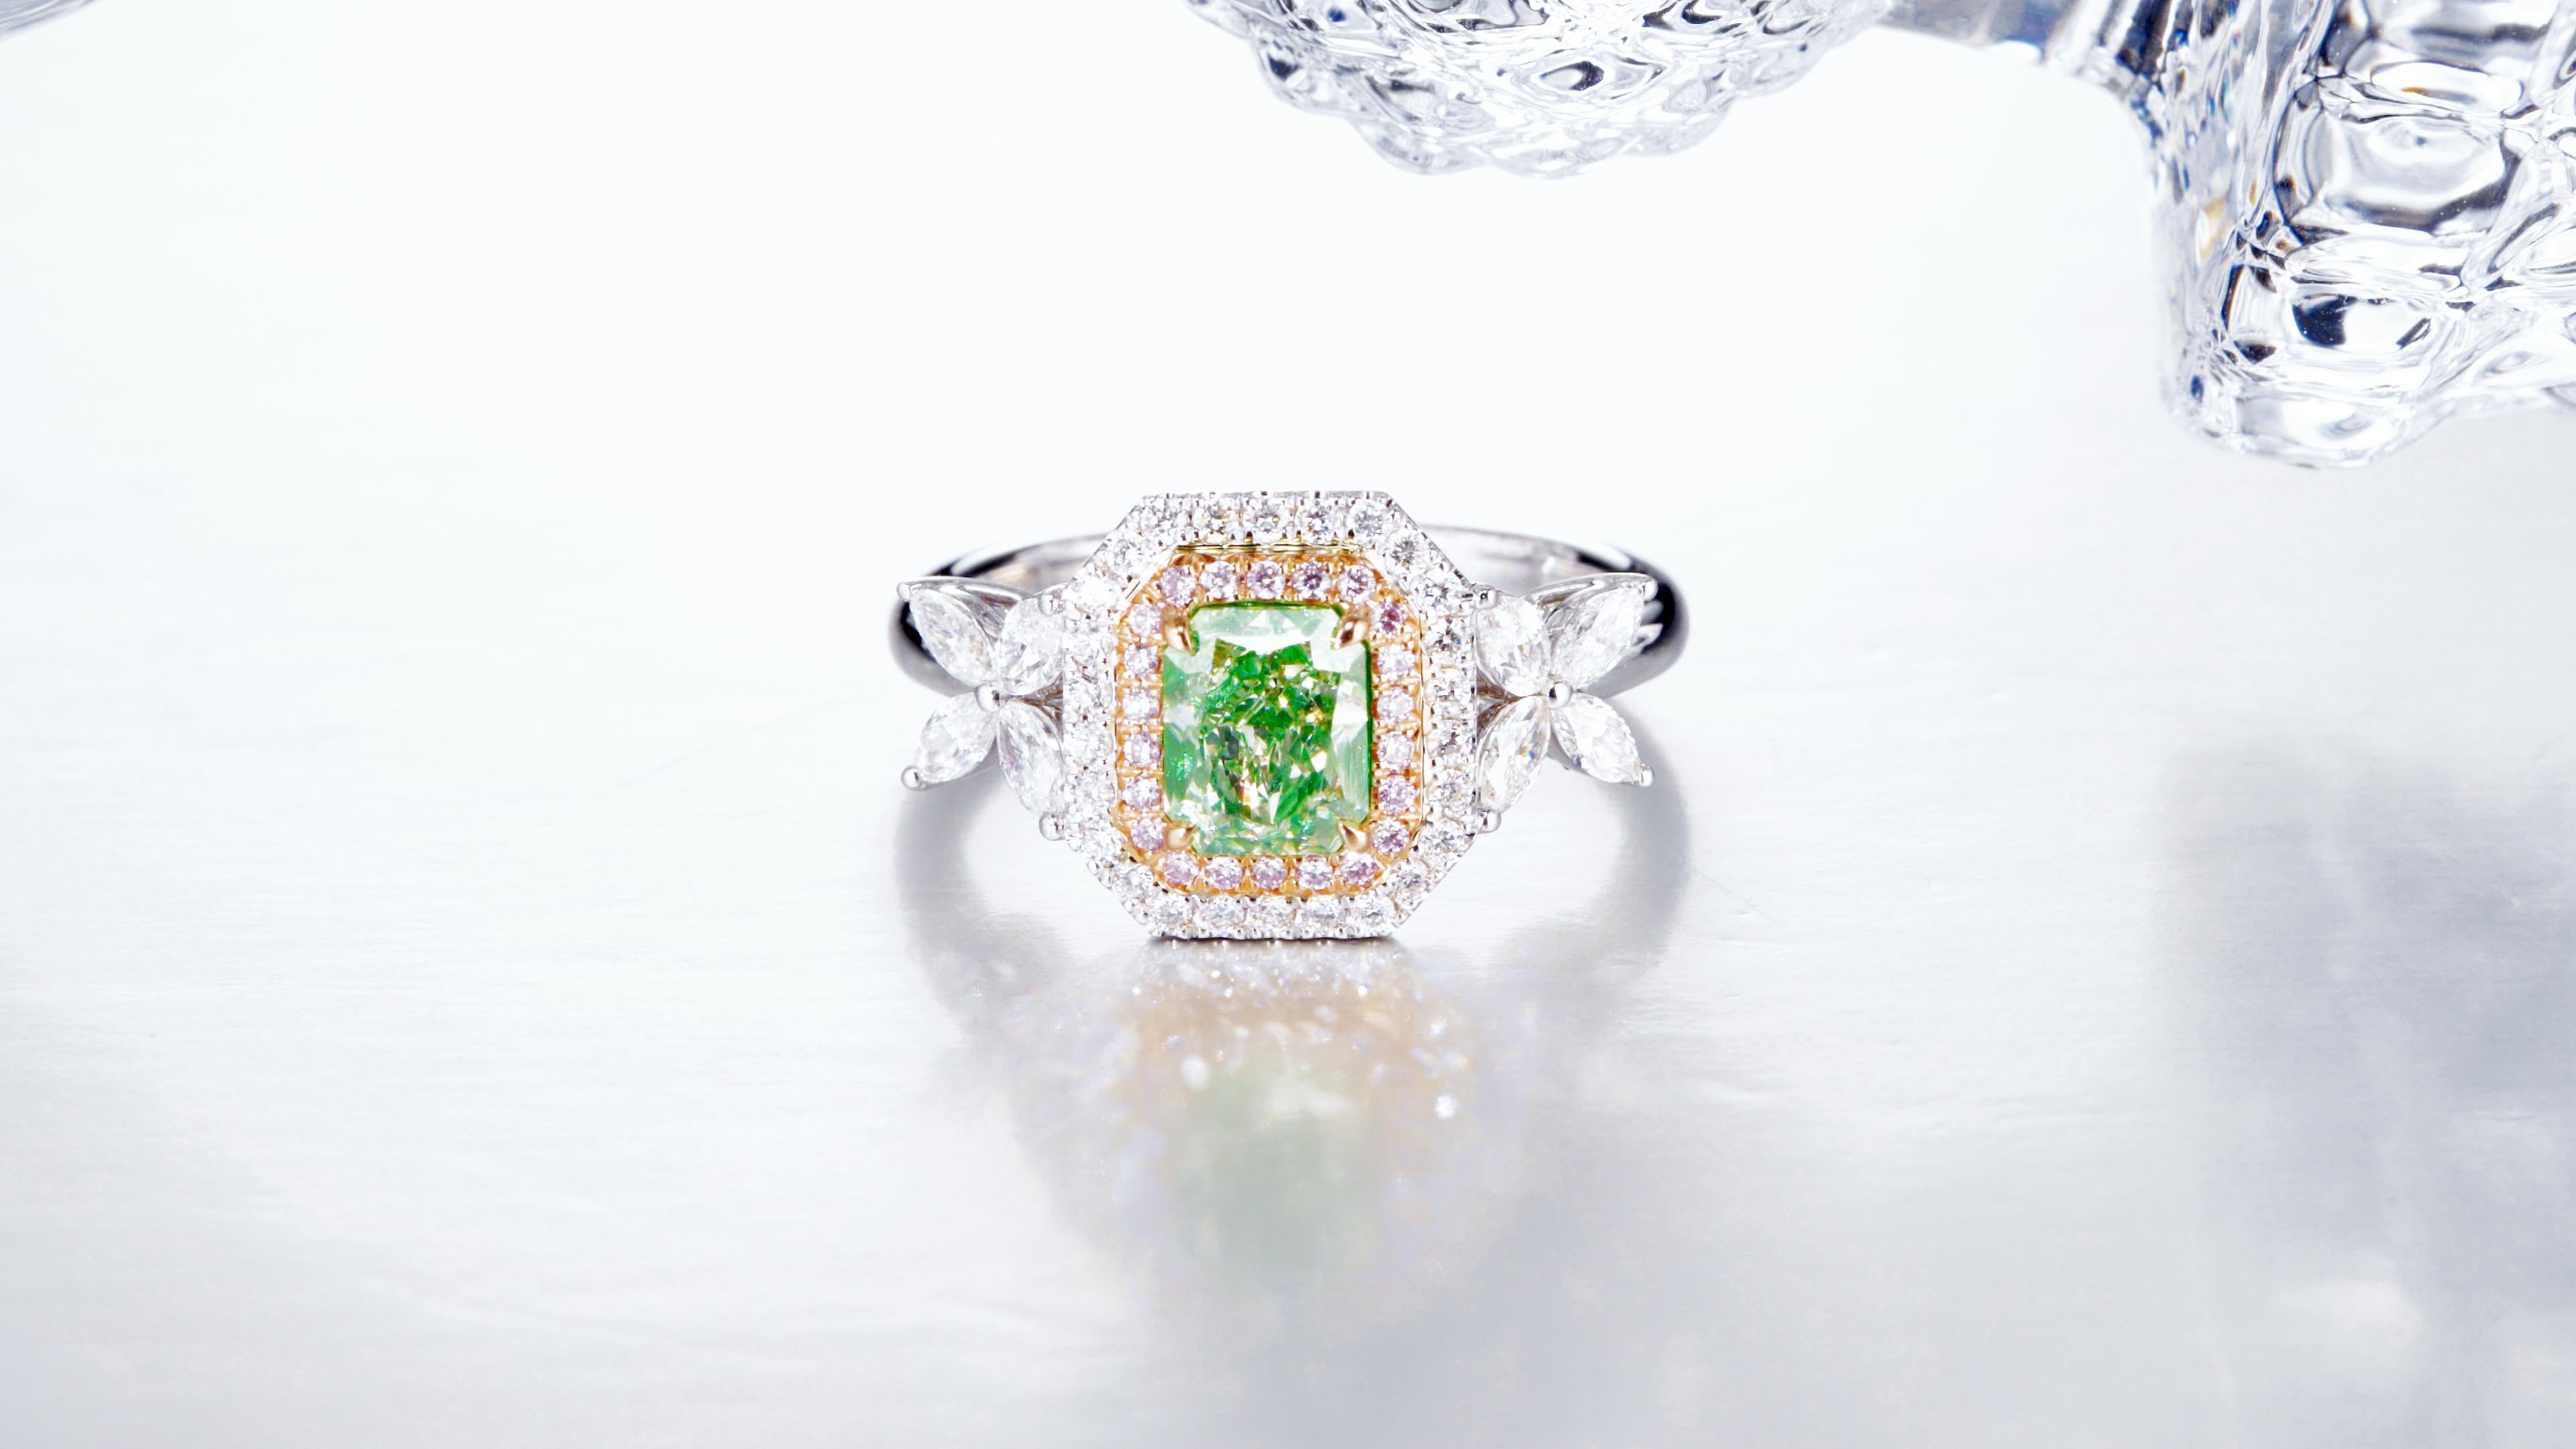 GIA Certified 1.00-carat Natural Fancy Light Green-Yellow Radiant Solitaire Ring. The centerpiece of this exquisite ring is a radiant-cut diamond, certified by GIA for its exceptional quality and natural fancy light green-yellow hue. The captivating